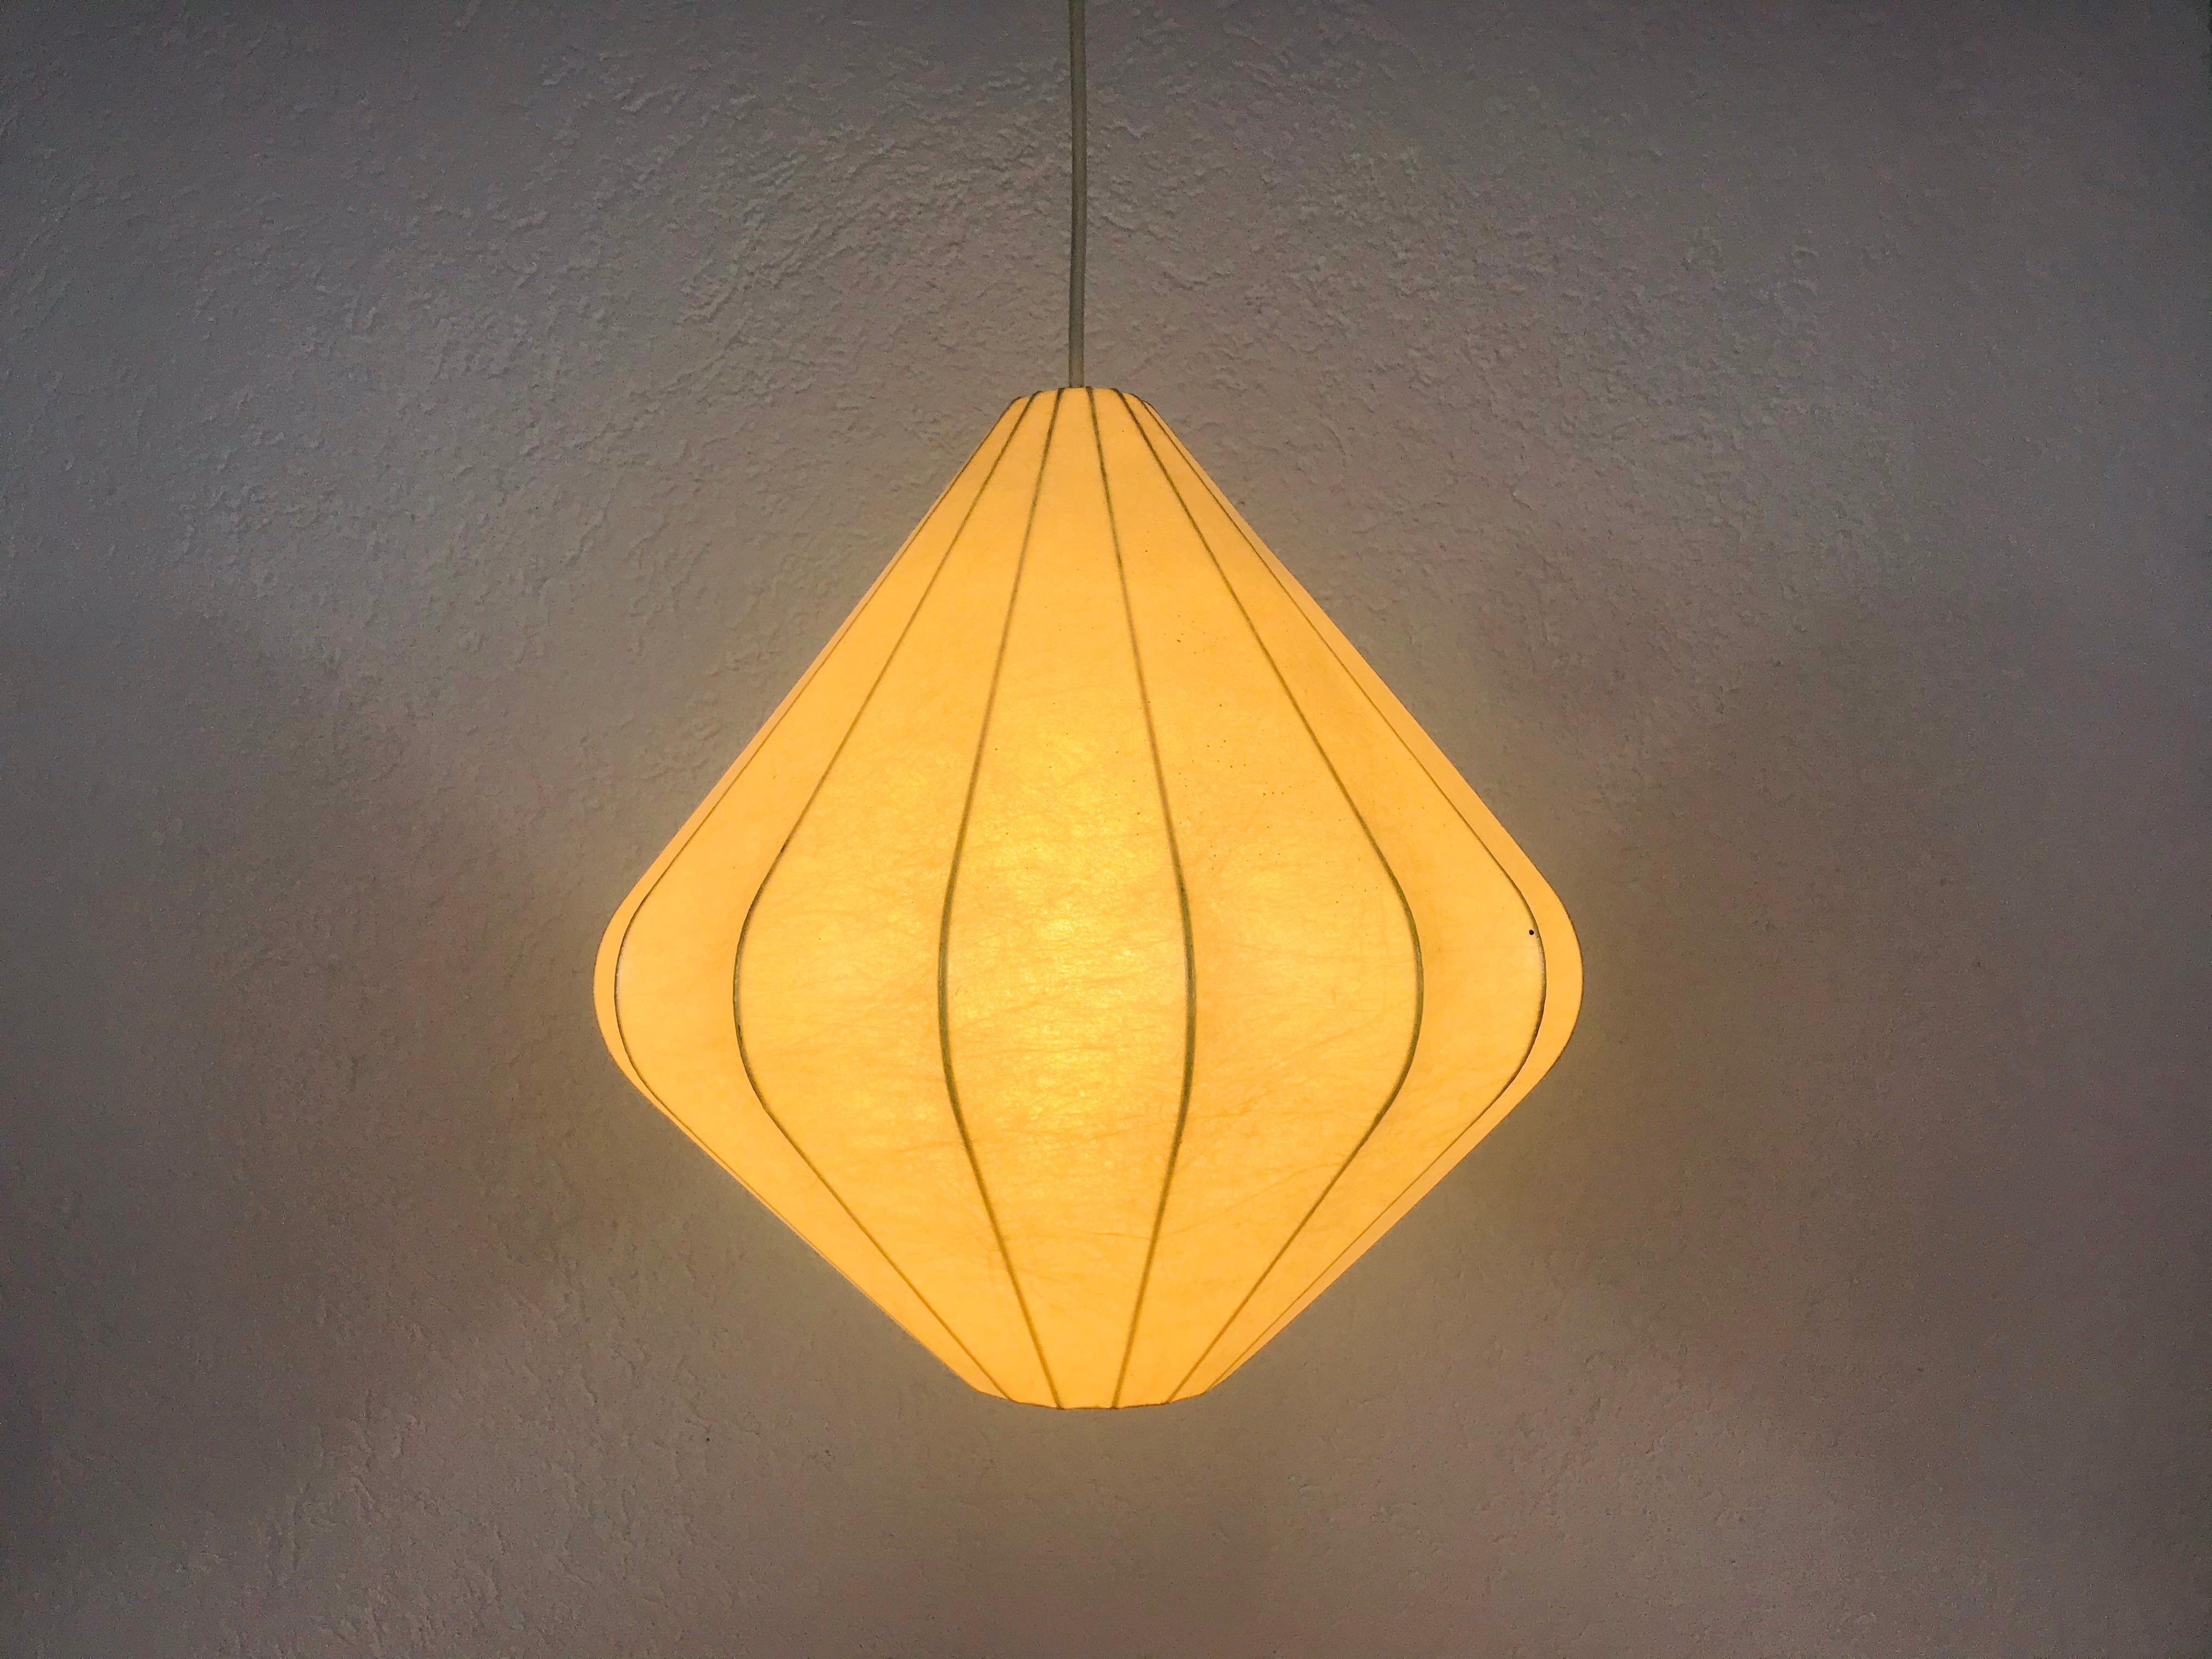 A cocoon pendant lamp made in Italy in the 1960s. The hanging lamp has been designed by Achille Castiglioni. The lamp shade is of original resin and has a flower shape.

The light requires one E27 light bulb.

